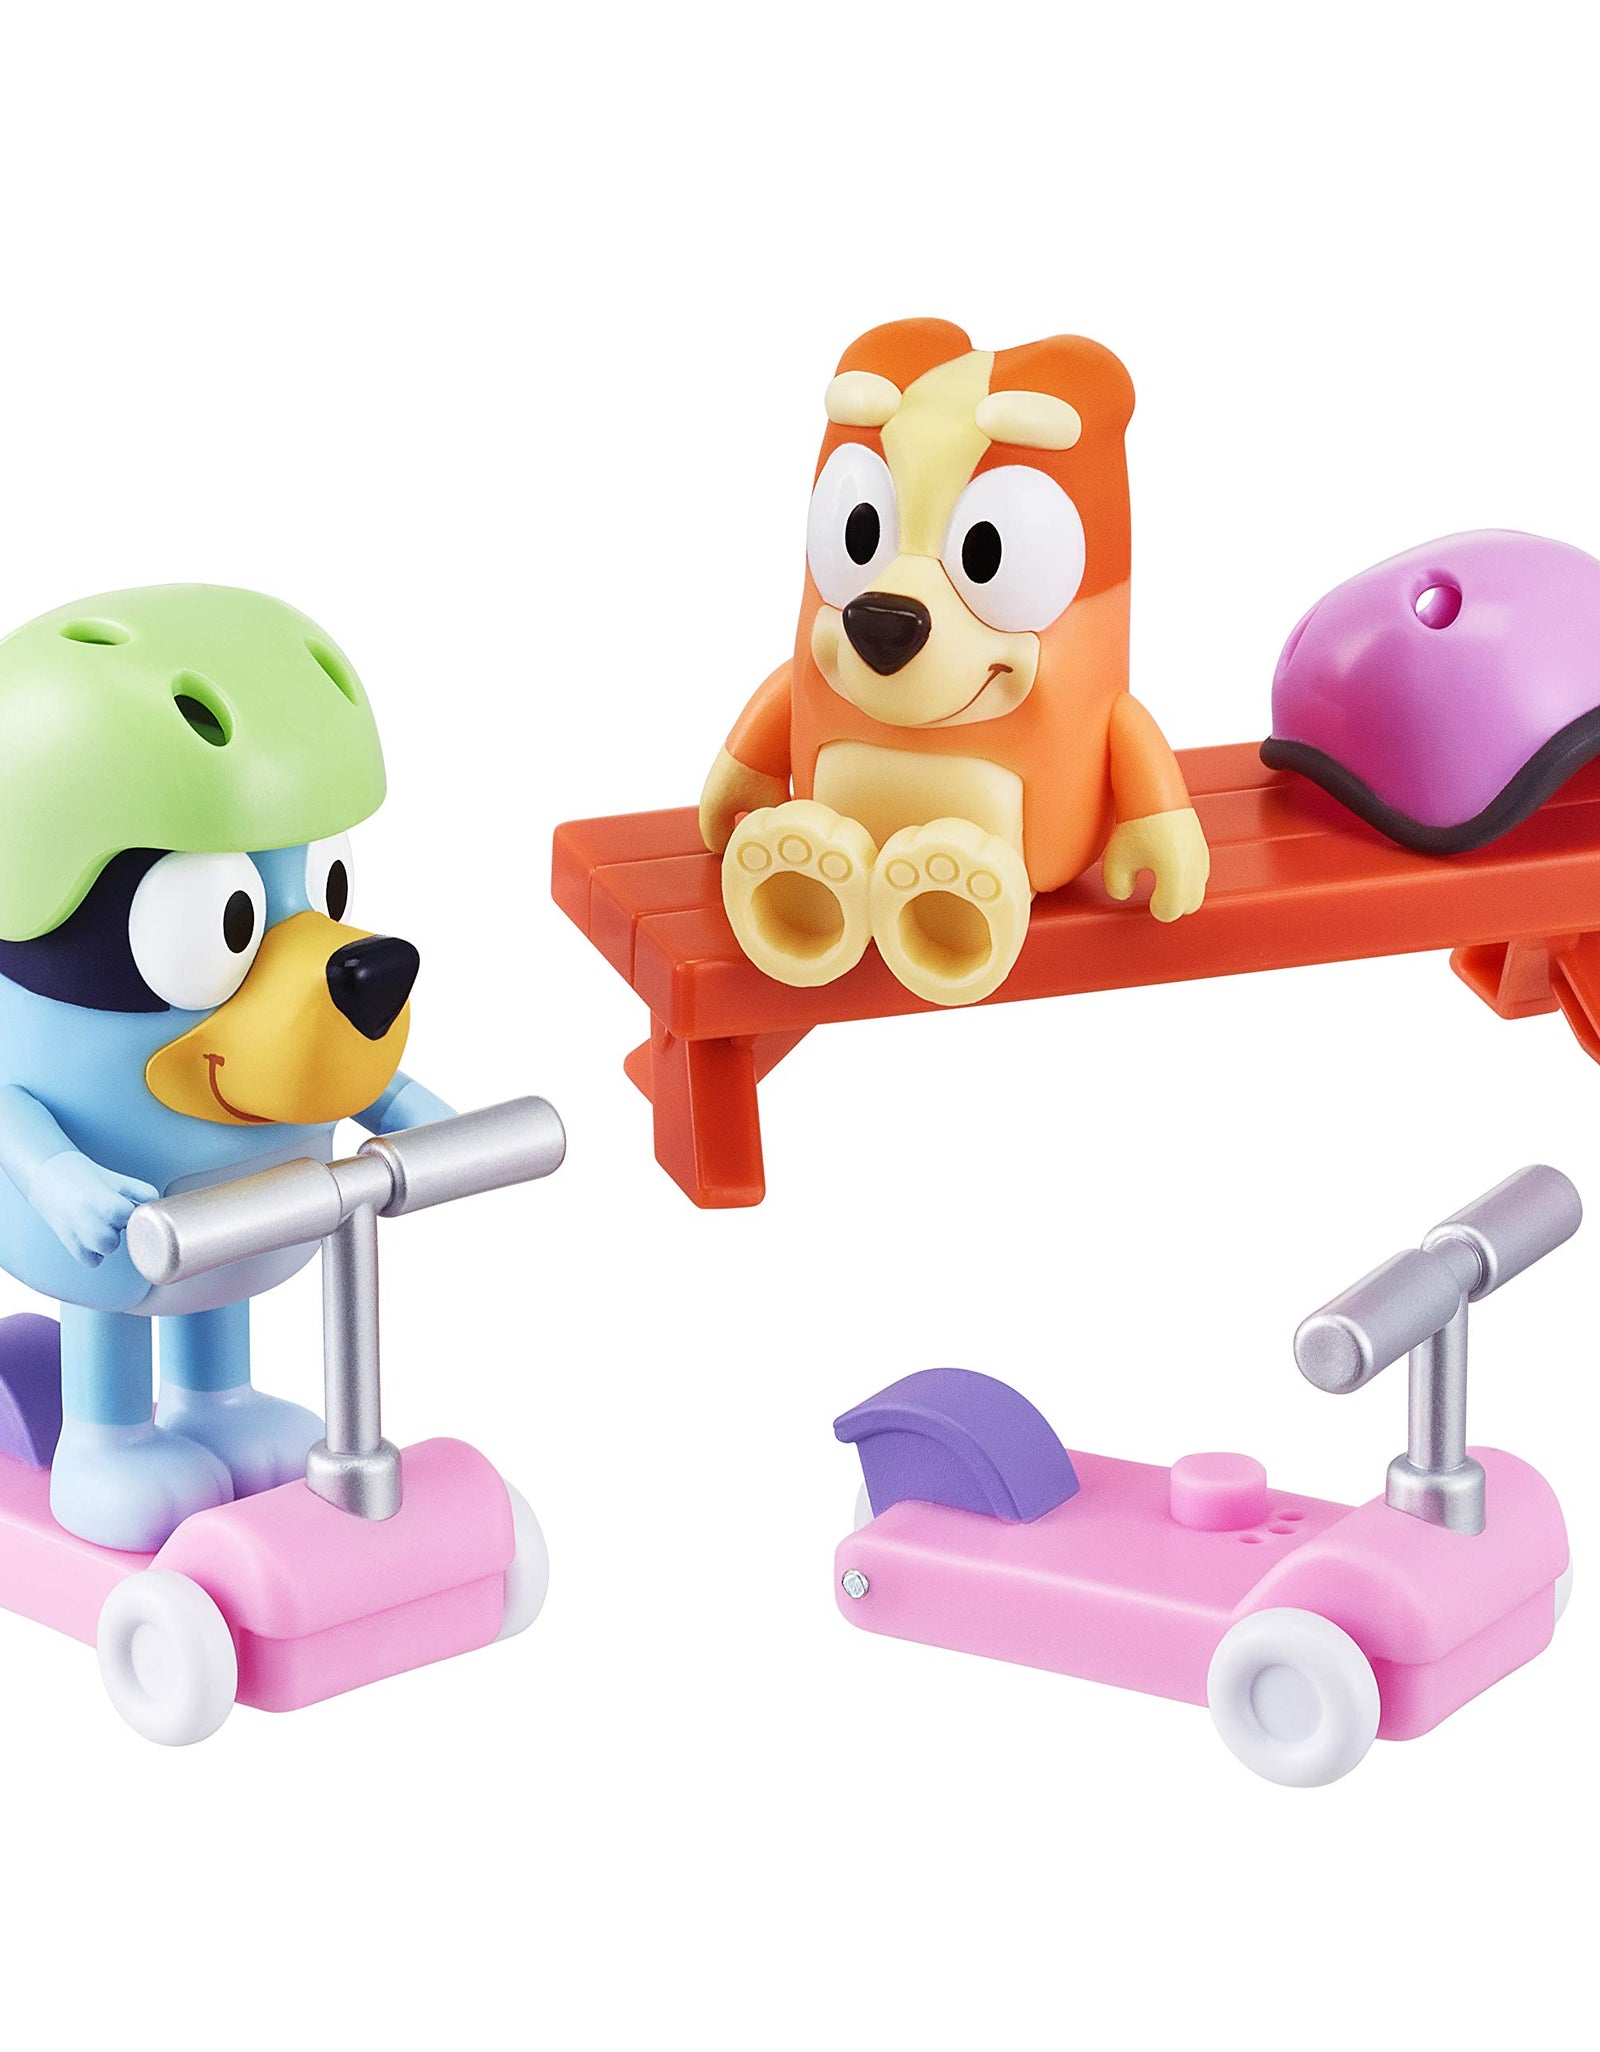 Bluey Vehicle 2-Pack, 2.5-3" Bluey & Bingo Articulated Figures - Scooter Time